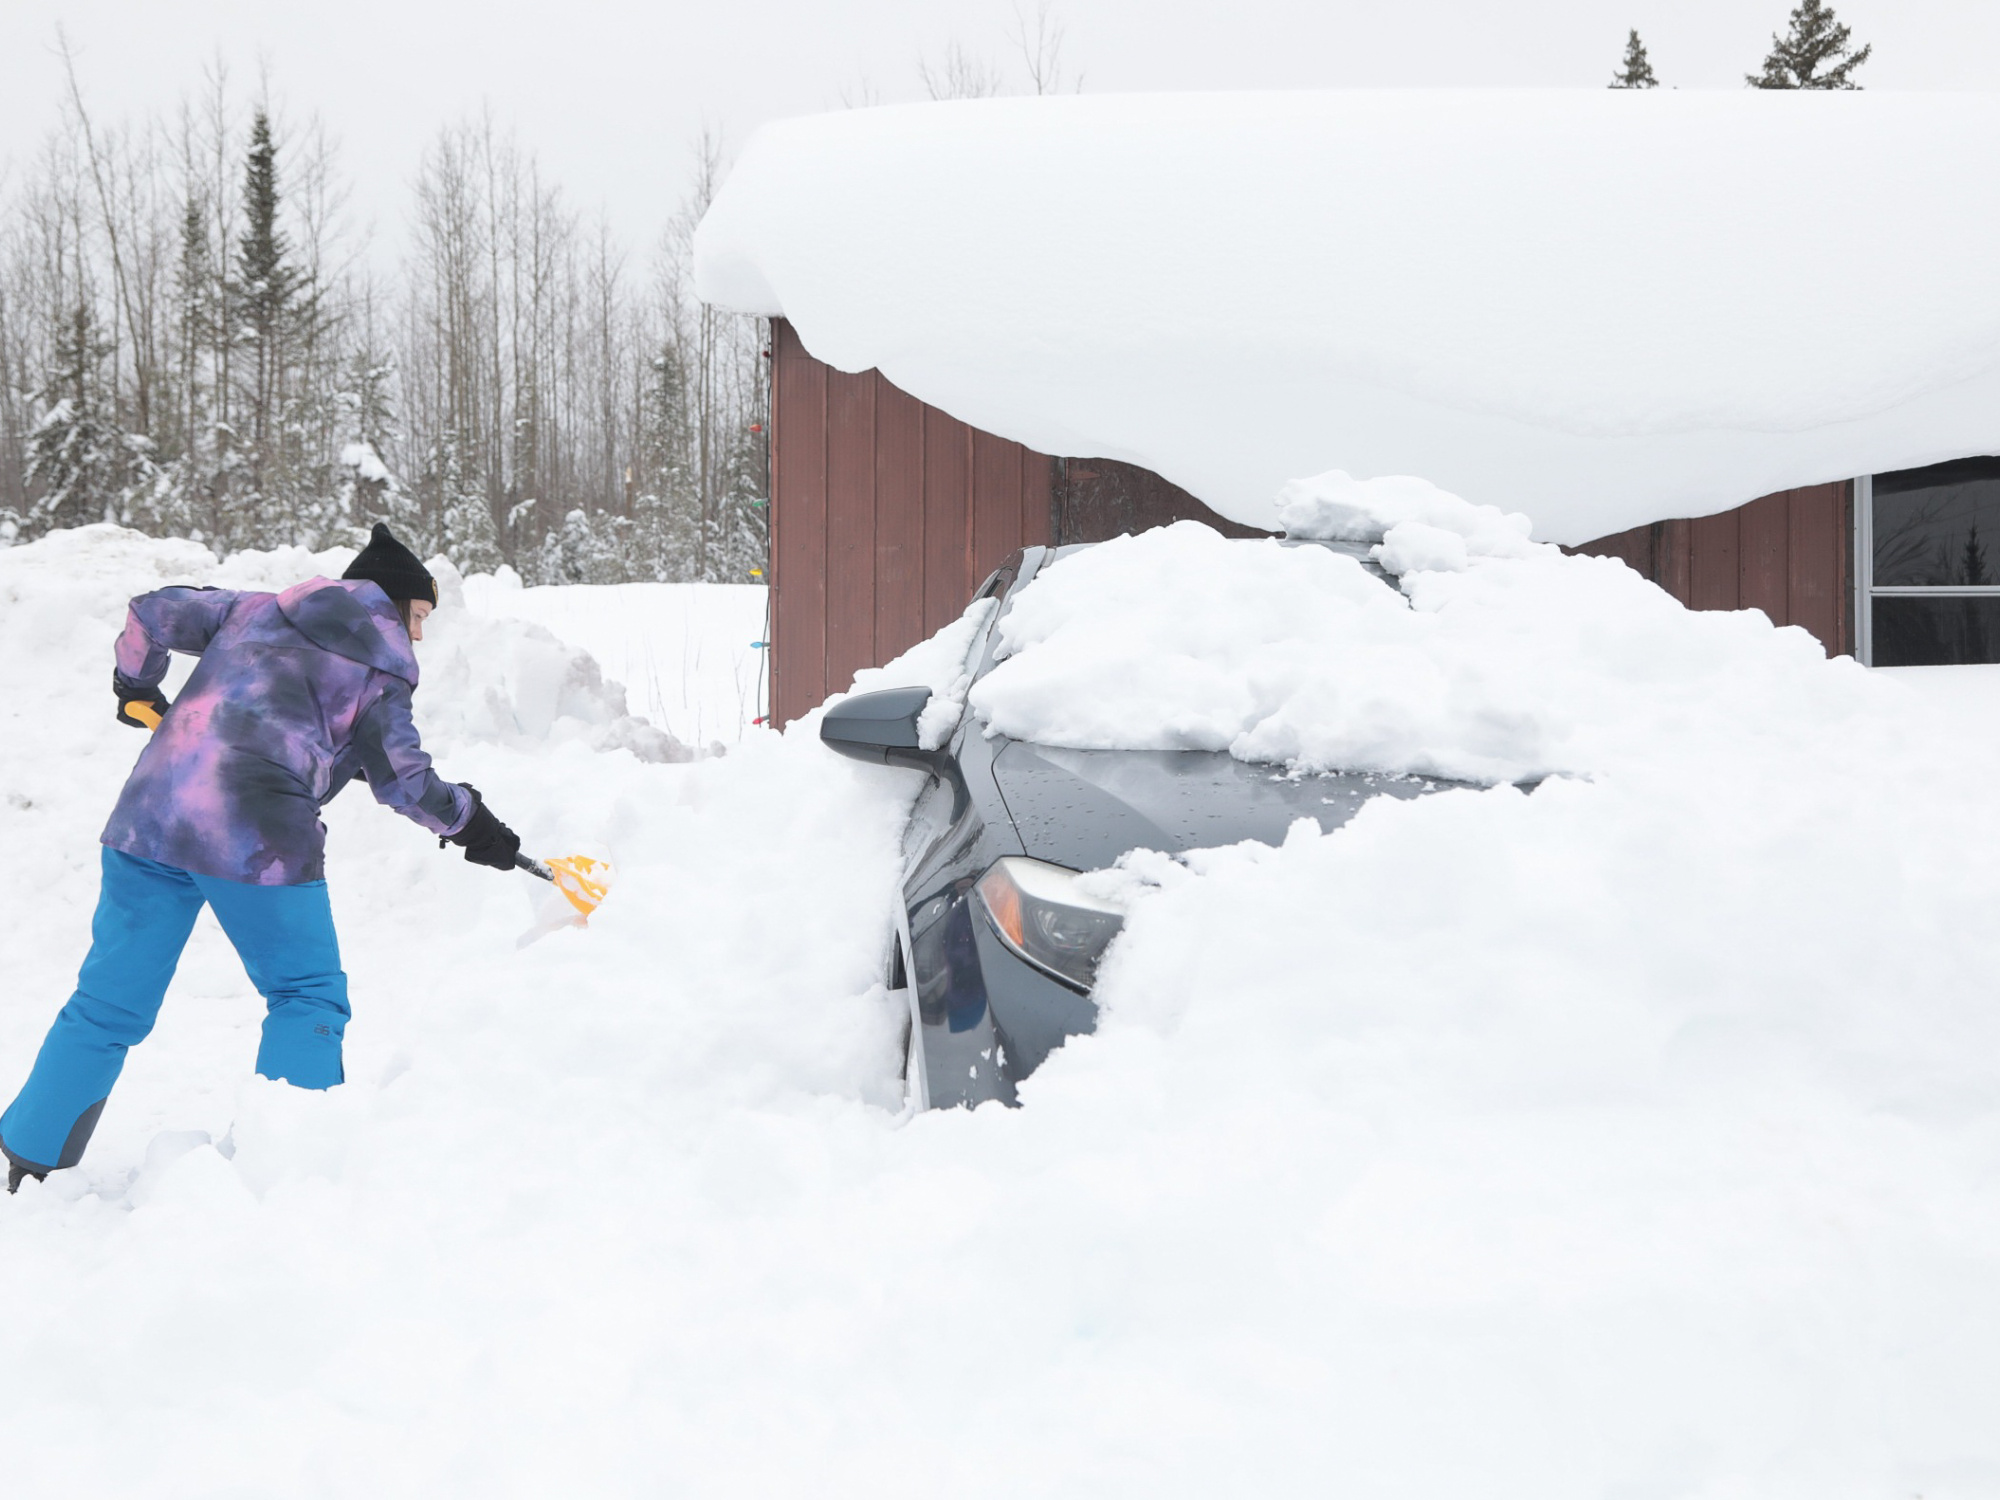 An Antigonish area resident shovels snow following the storm in early February